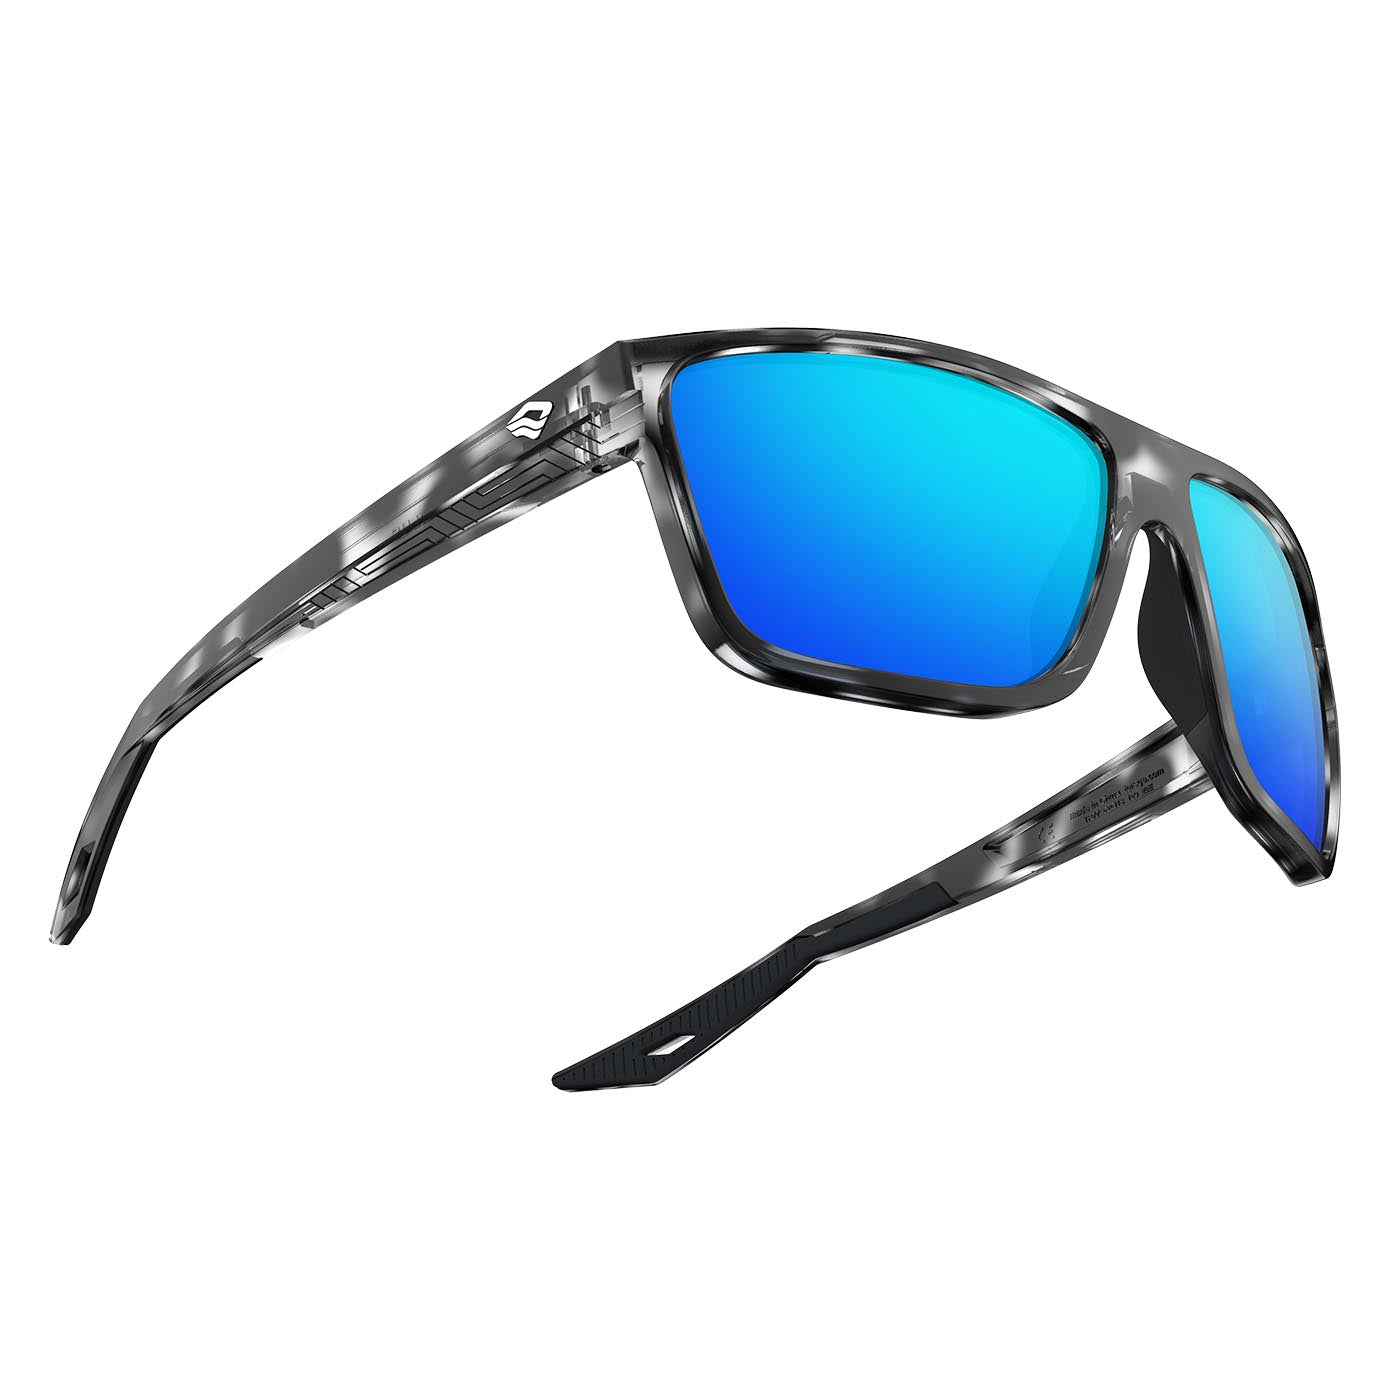 Black Reef Sports Polarized Sunglasses For Men Women With Lifetime Warranty  - Ideal for Running, Cycling, Driving, Fishing & Outdoor Activities - Black  Frame & Polarized Blue Mirrored